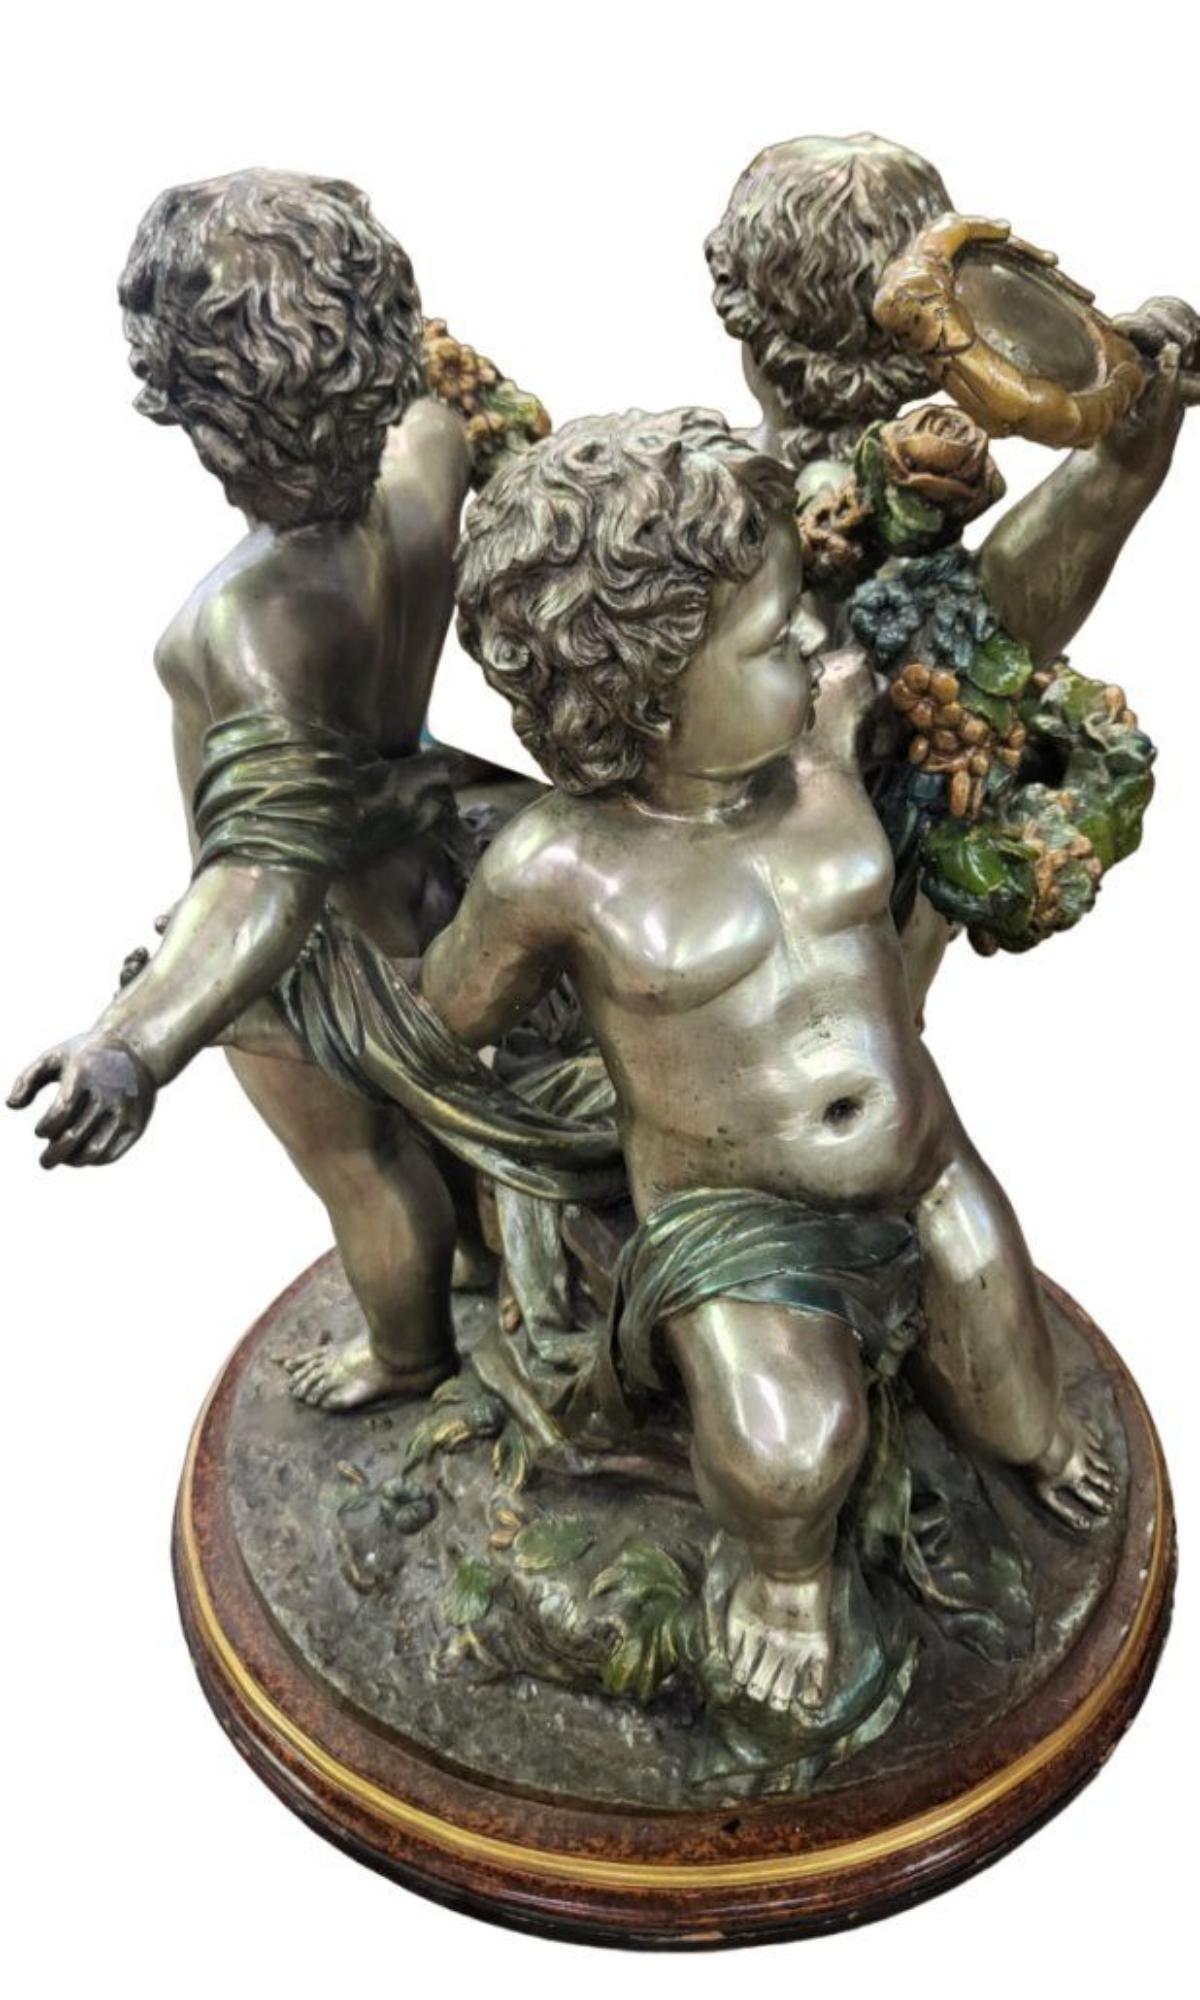 S. Kelliam (20th Century) Figural bronze group of cherubs. Depicting seated cherubs on a rock, signed S.Kelliam. Patinated and silver-gilt bronze. The glass top is not shown in the picture.